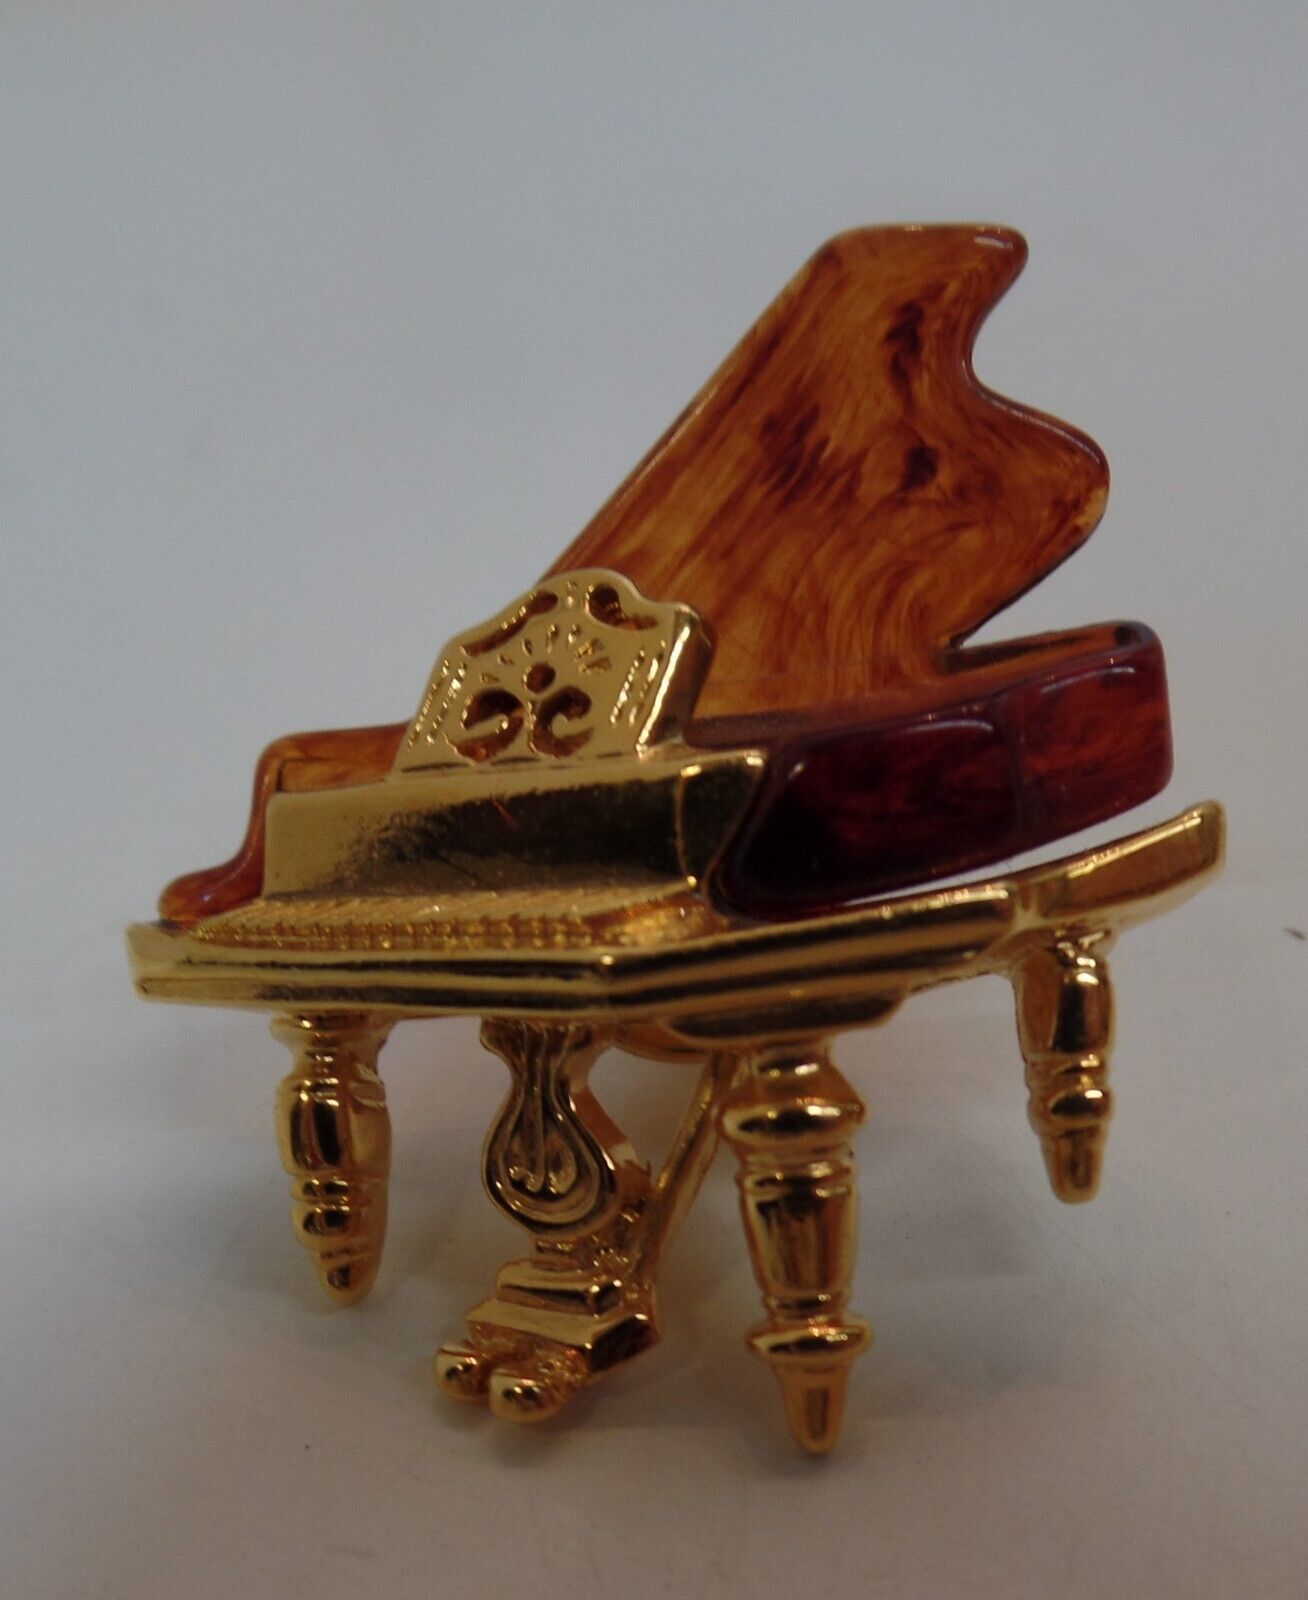 AVON (Stamped) Vintage Piano Pin Gold Tone Amber Color Lapel Enamel Collectible - $24.75